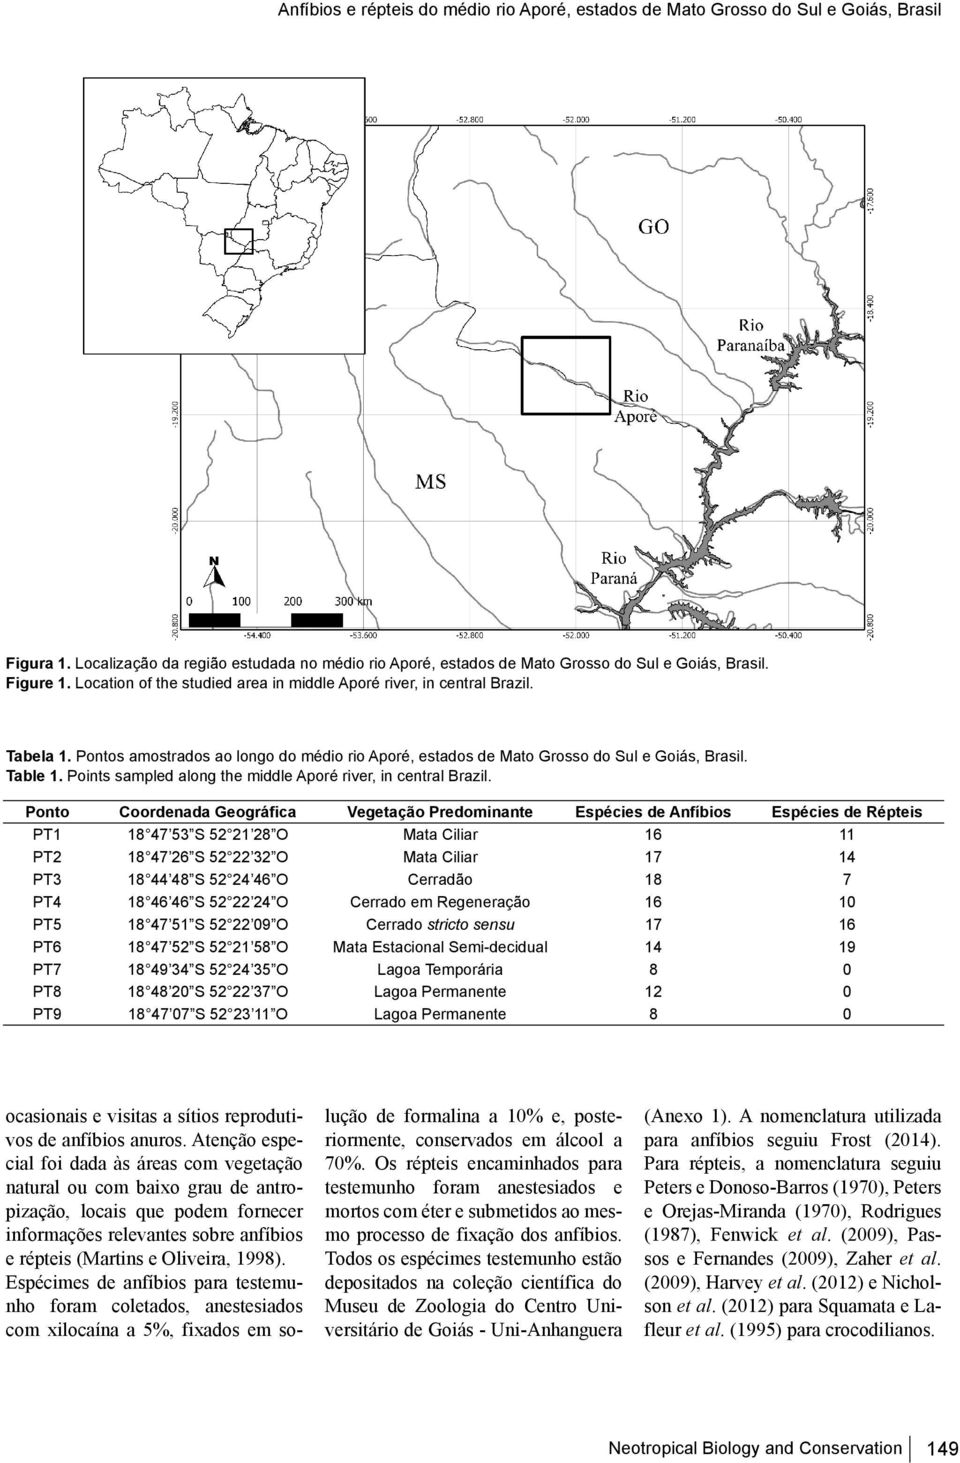 Points sampled along the middle Aporé river, in central Brazil.